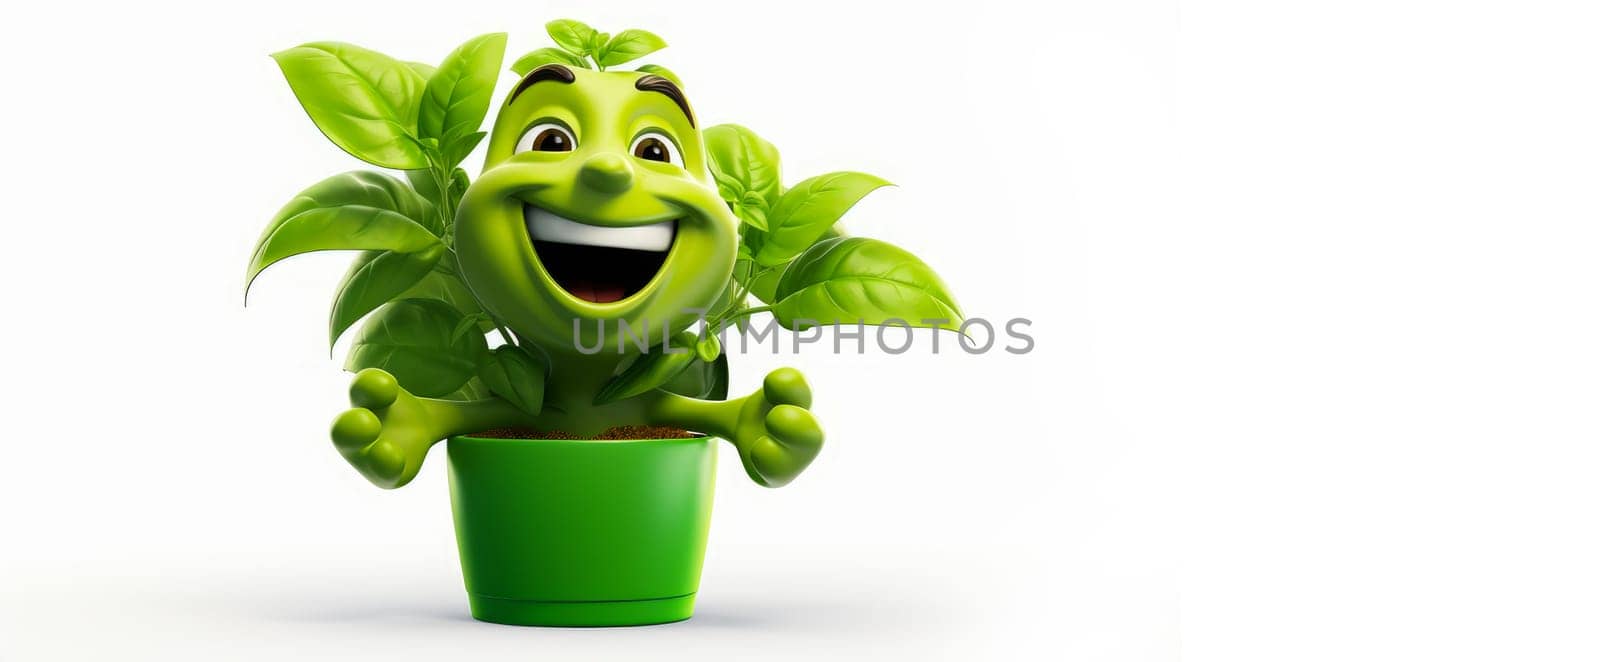 Basil with a cheerful face 3D on a white background. Cartoon characters, three-dimensional character, healthy lifestyle, proper nutrition, diet, fresh vegetables and fruits, vegetarianism, veganism, food, breakfast, fun, laughter, banner